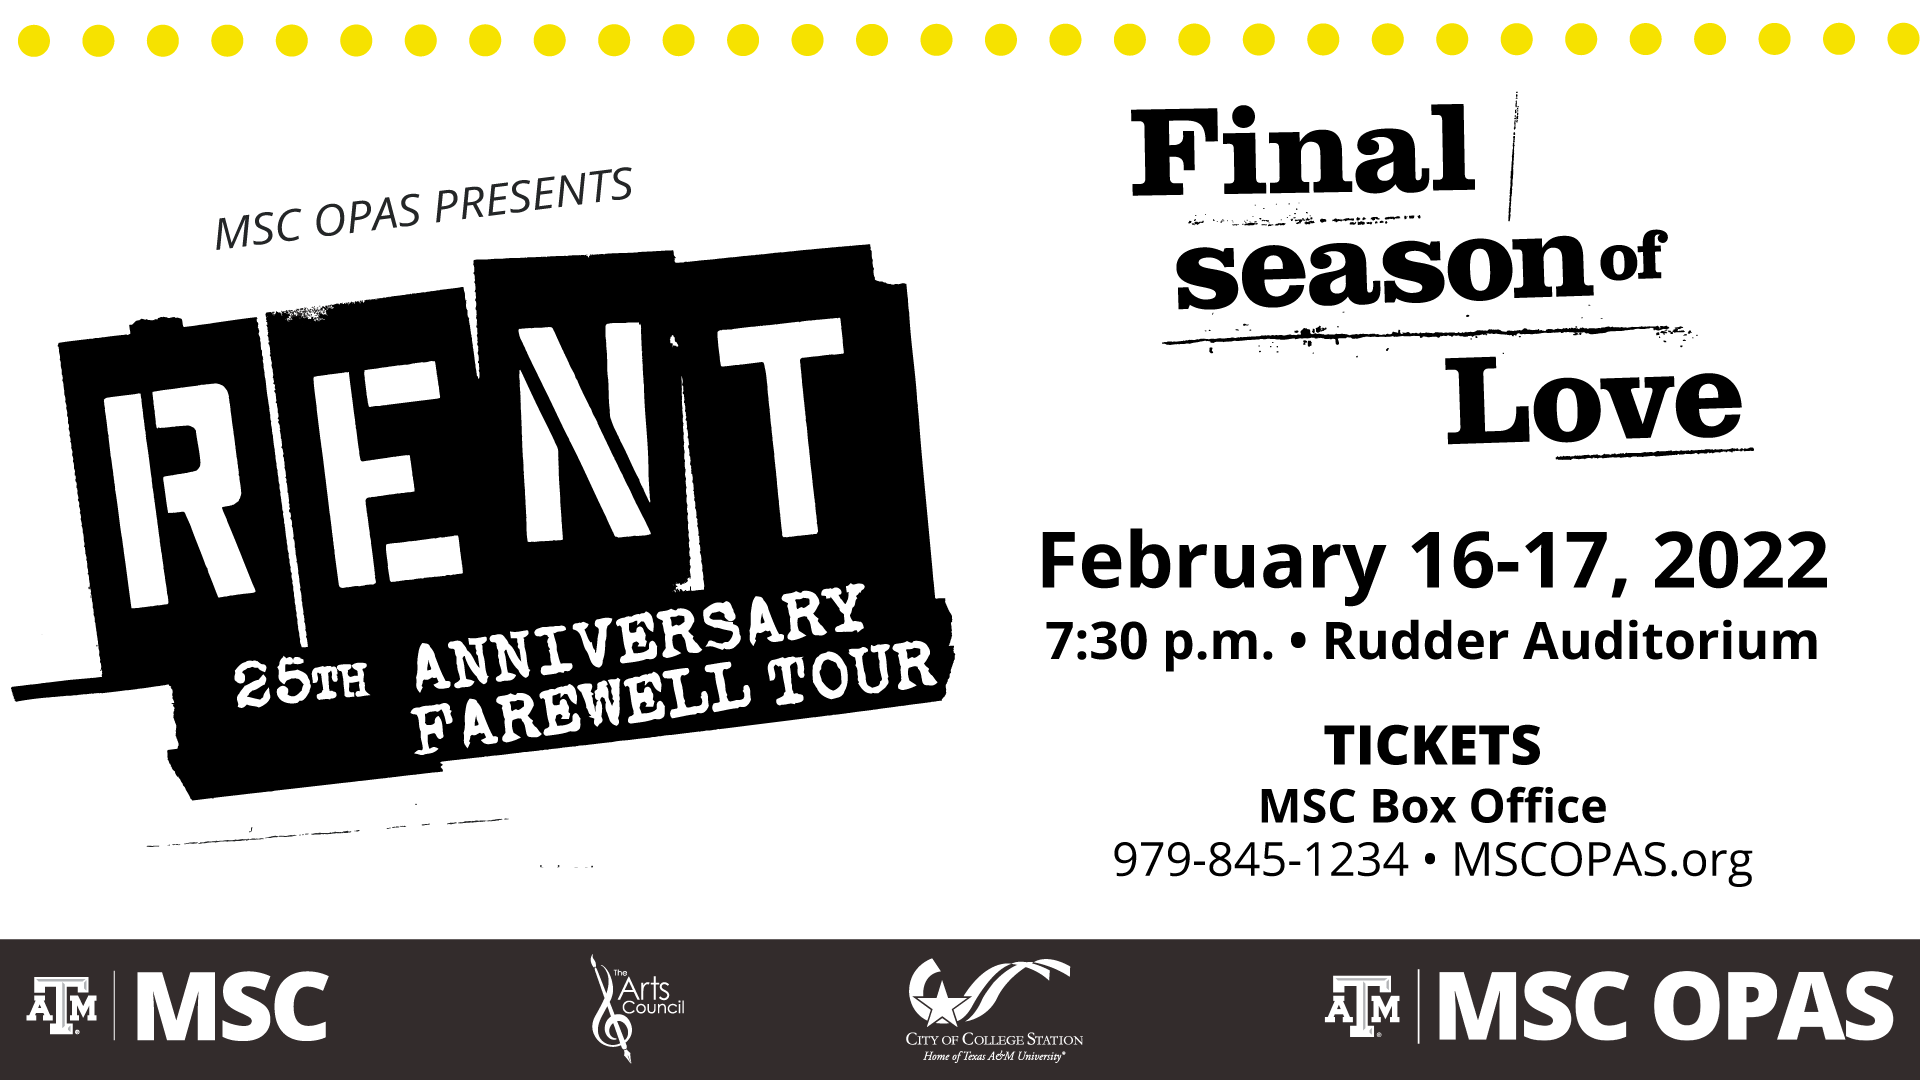 MSC OPAS Presents RENT 25th Anniversary Farewell Tour. Final Season of Love. February 16 and 17, 2022. 7:30 p.m. at the Rudder Auditorium. Tickets: MSC Box office 979.845.1234 and MSCOPAS.org